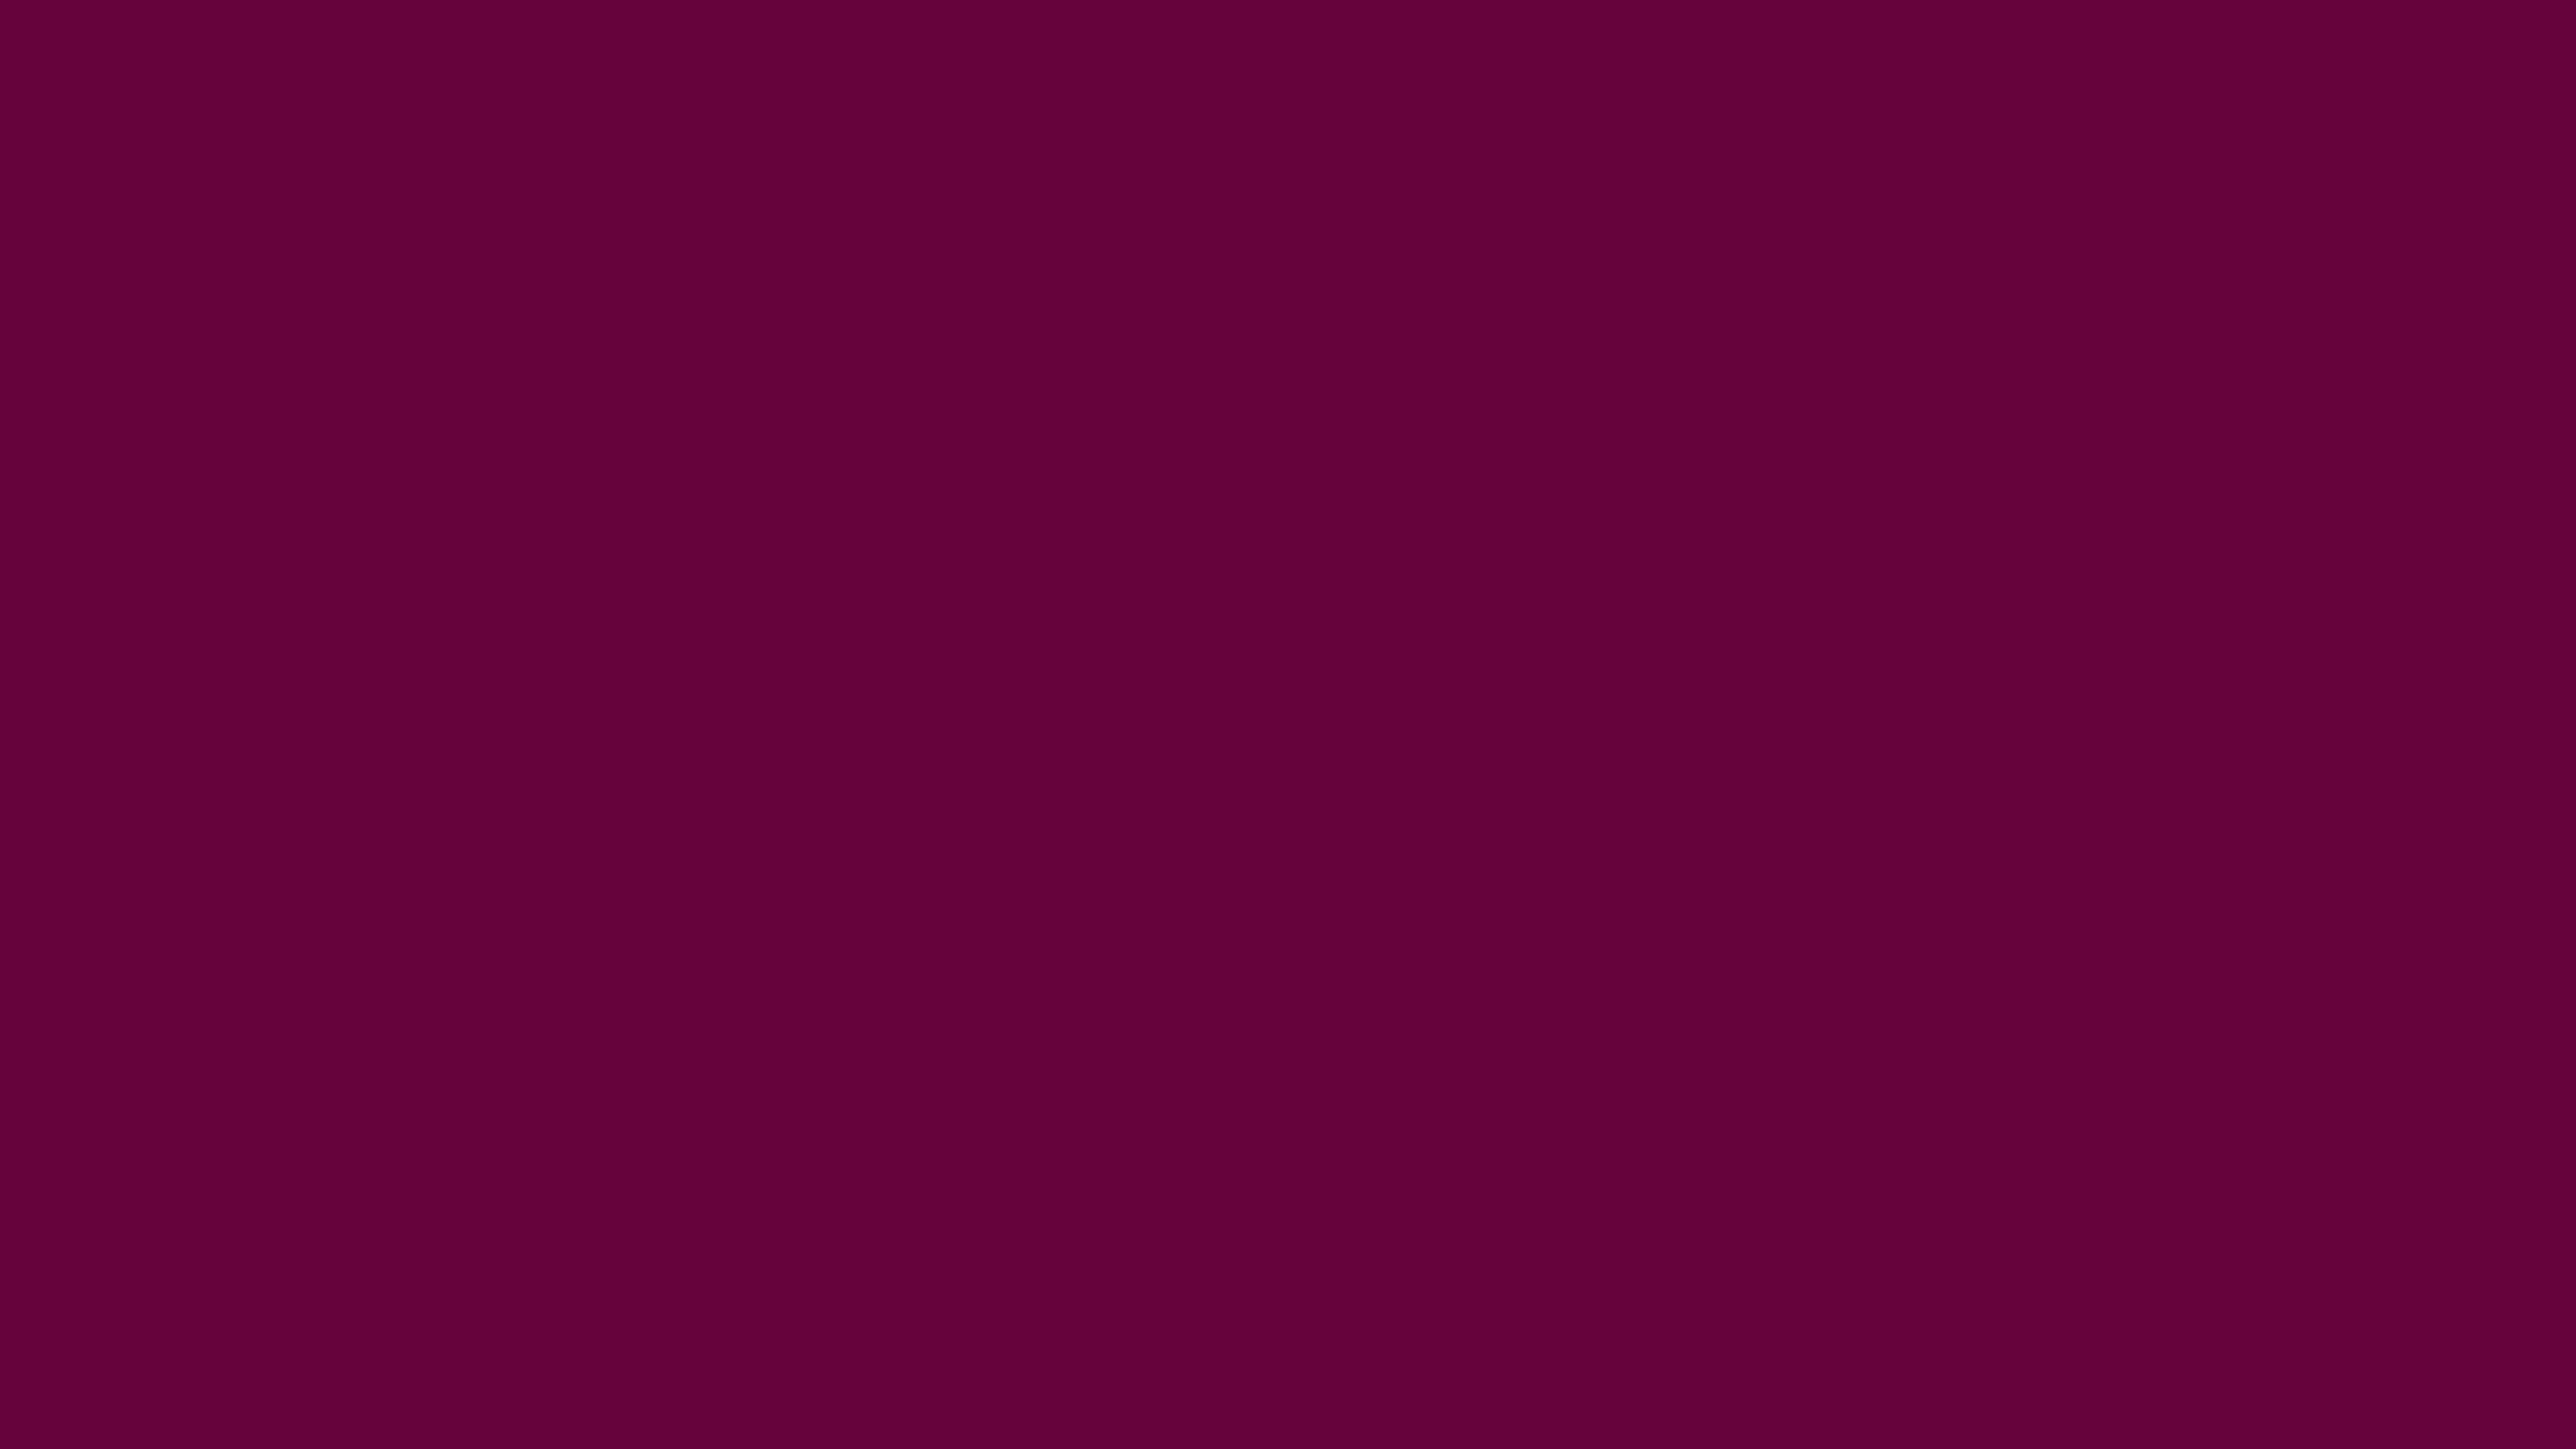 7680x4320 Tyrian Purple Solid Color Background